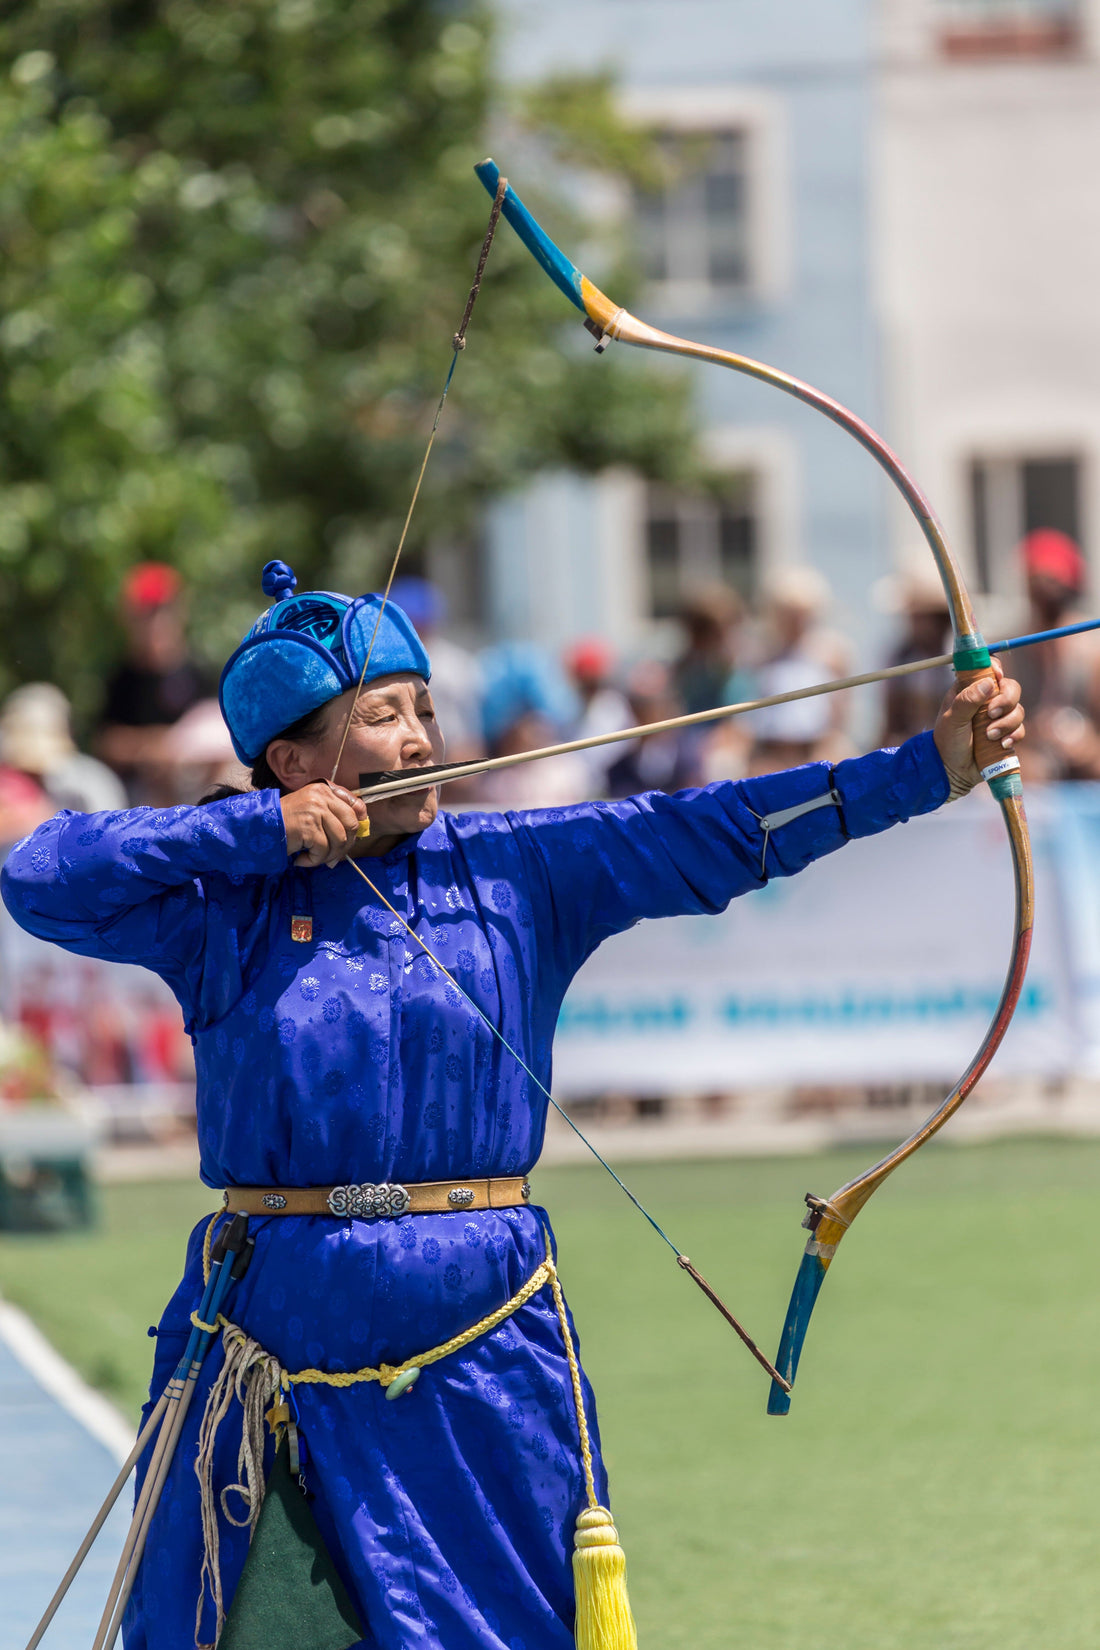 The Naadam Festival: Archery and Horse Racing!